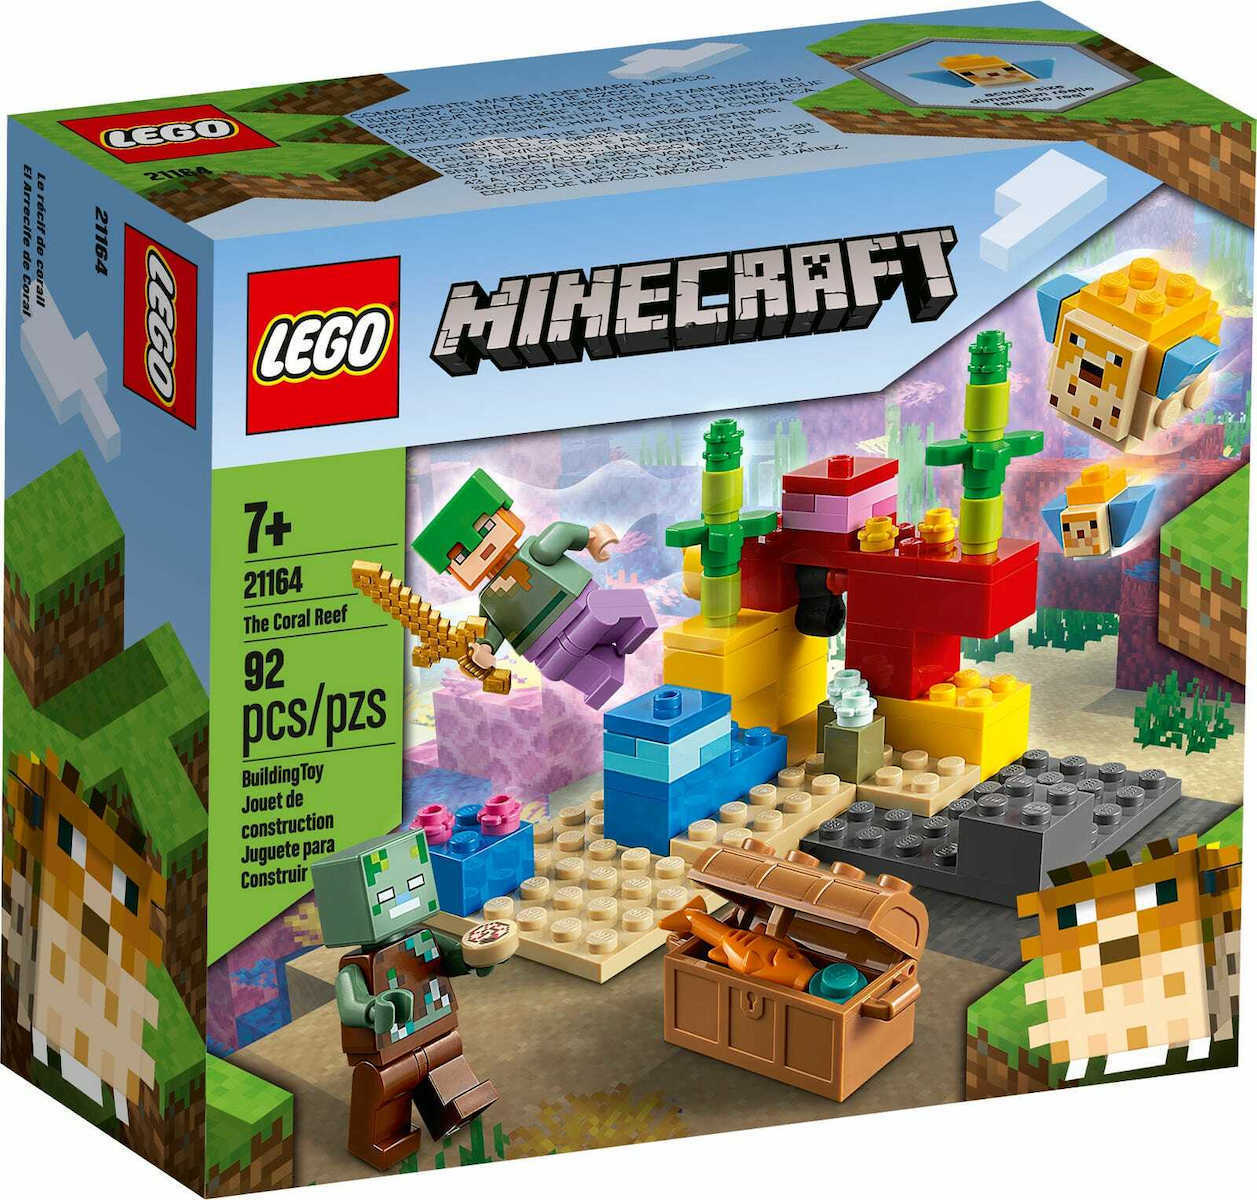 LEGO MINECRAFT 21164 THE CORAL REEF